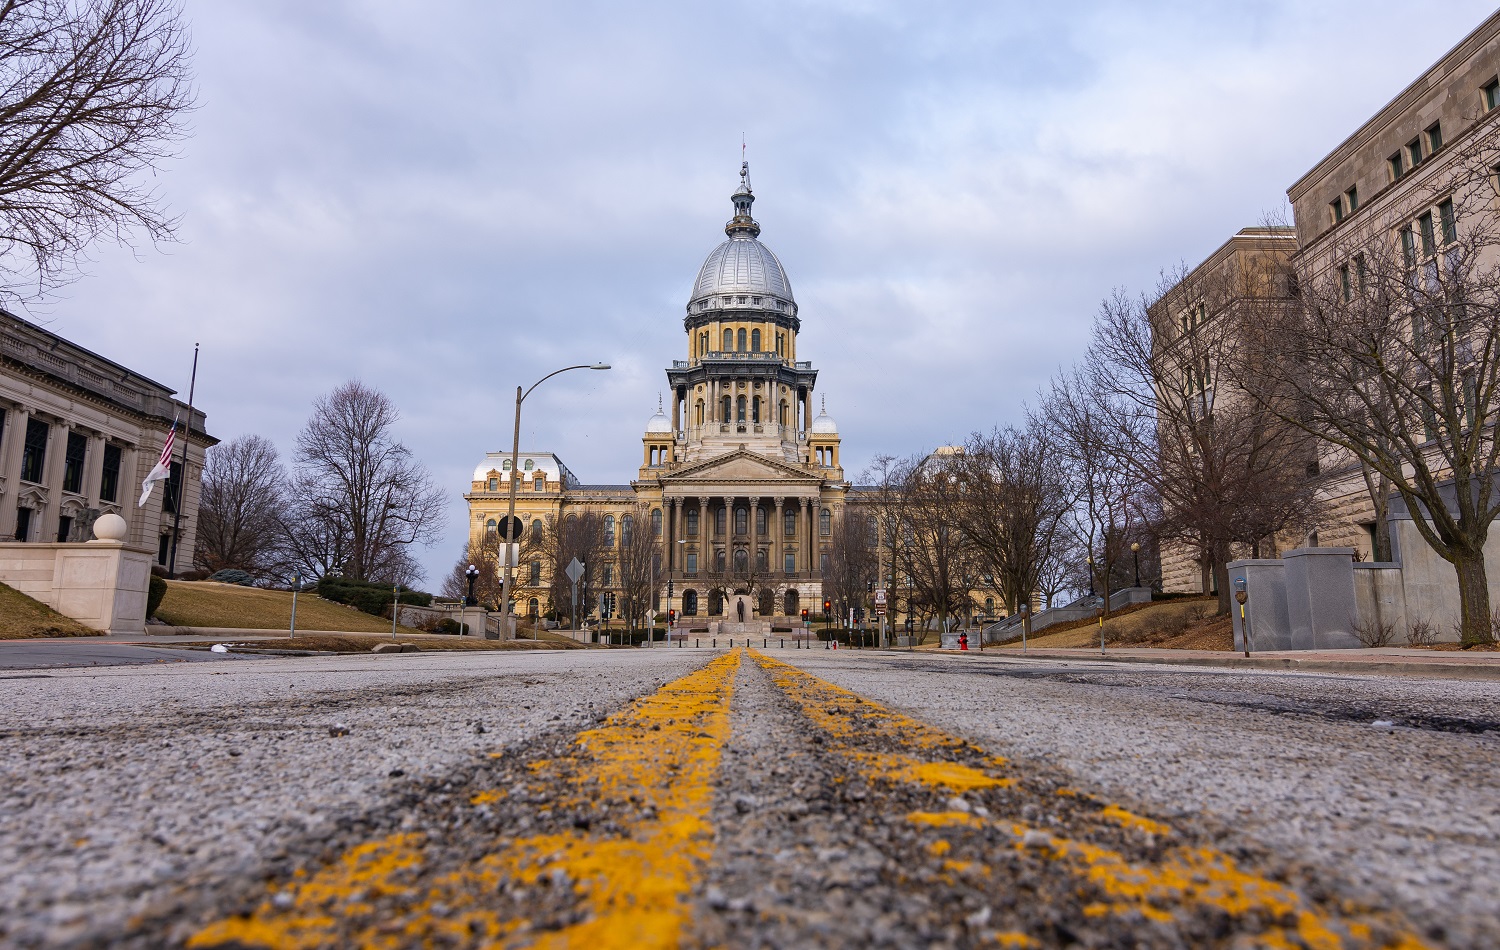 Illinois budget worsened foster care crisis: view of Illinois state capitol from rough road leading up to it.